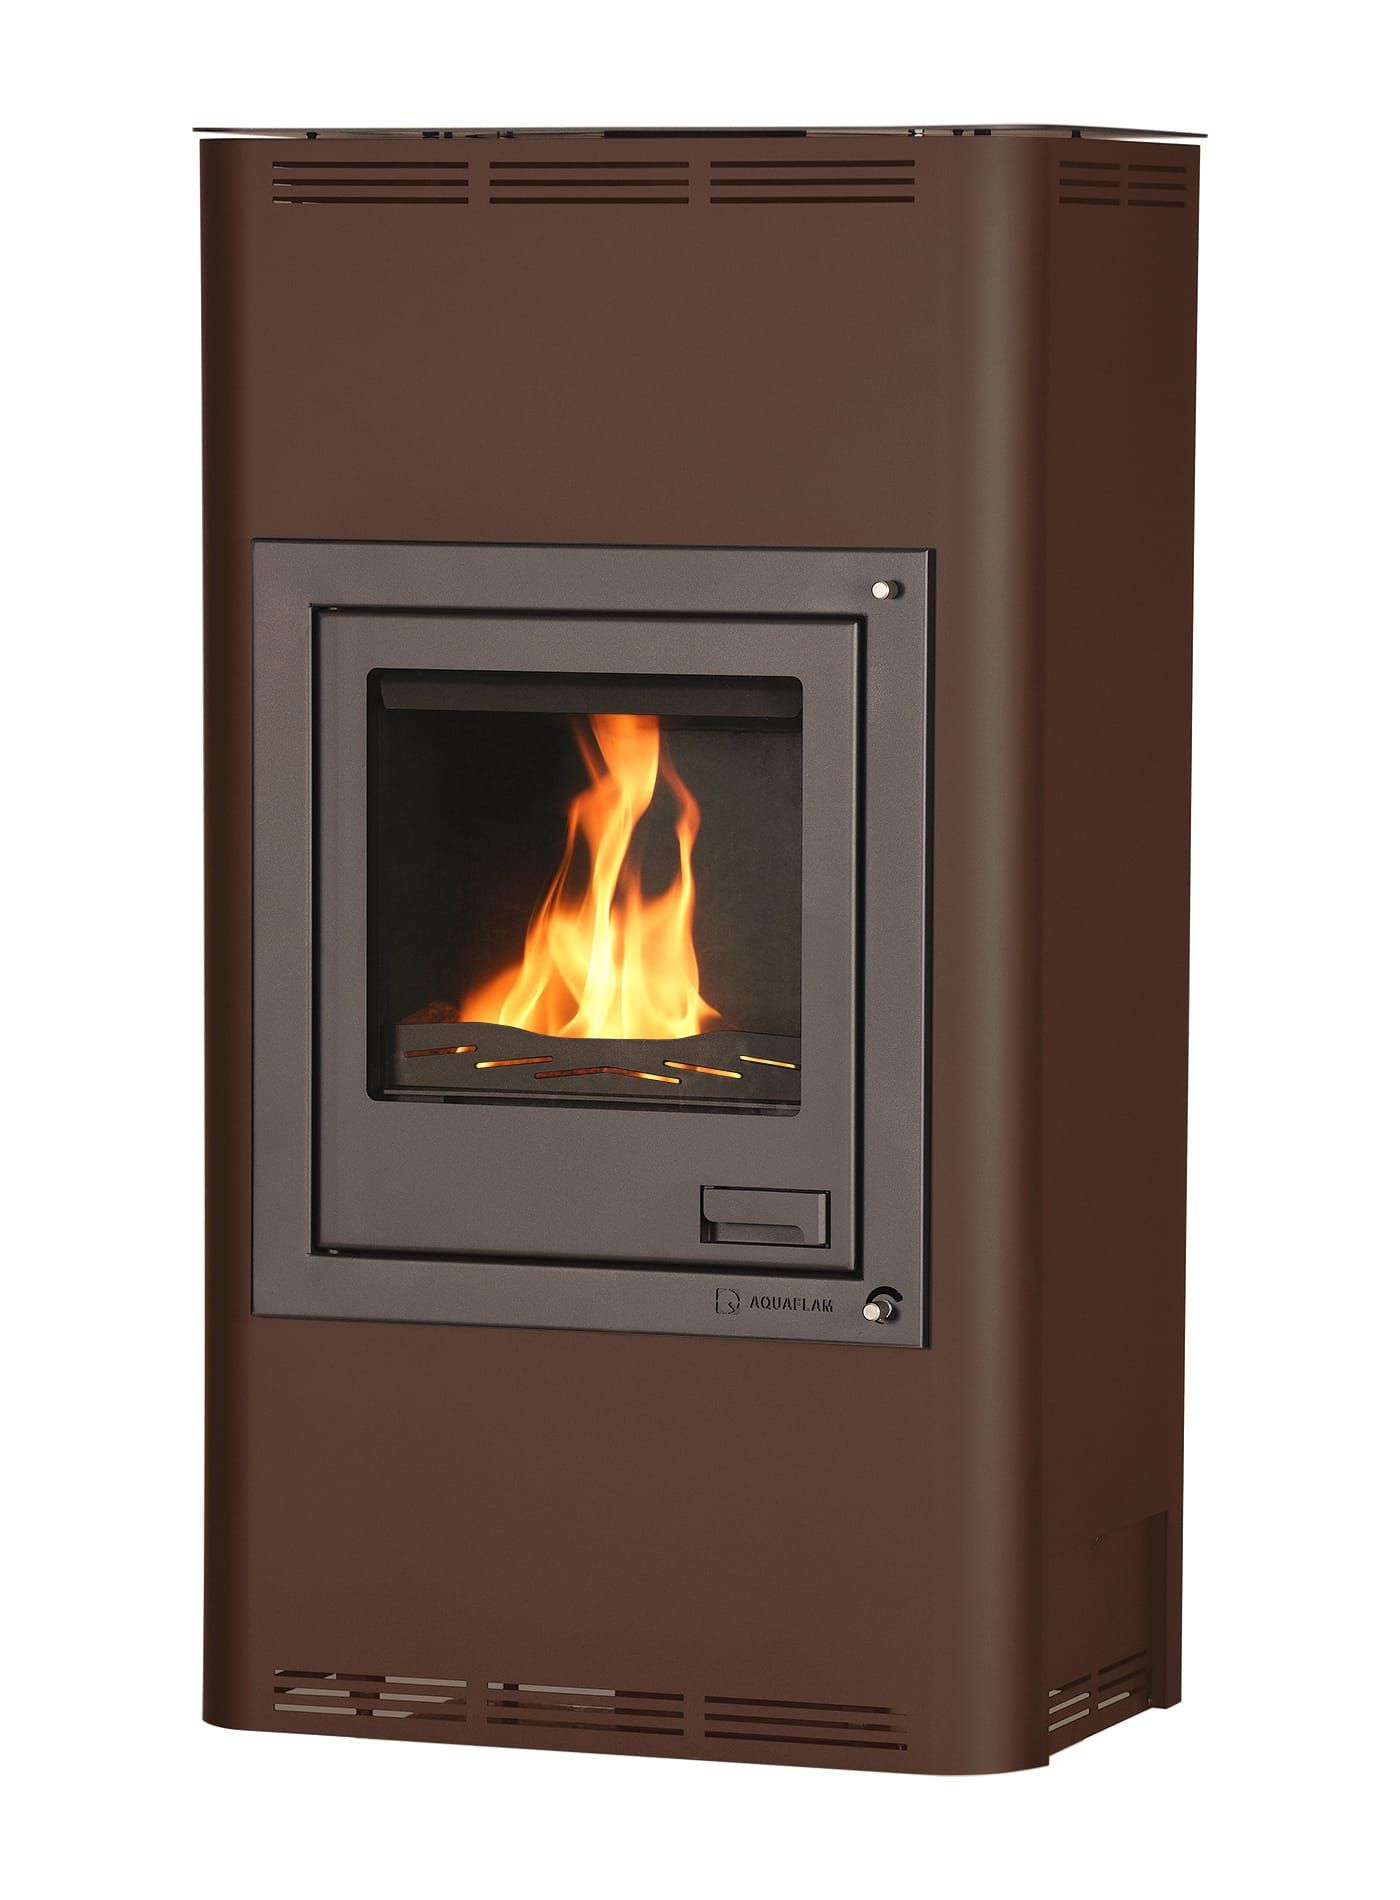 Aquaflam central heating fireplace 17 kW